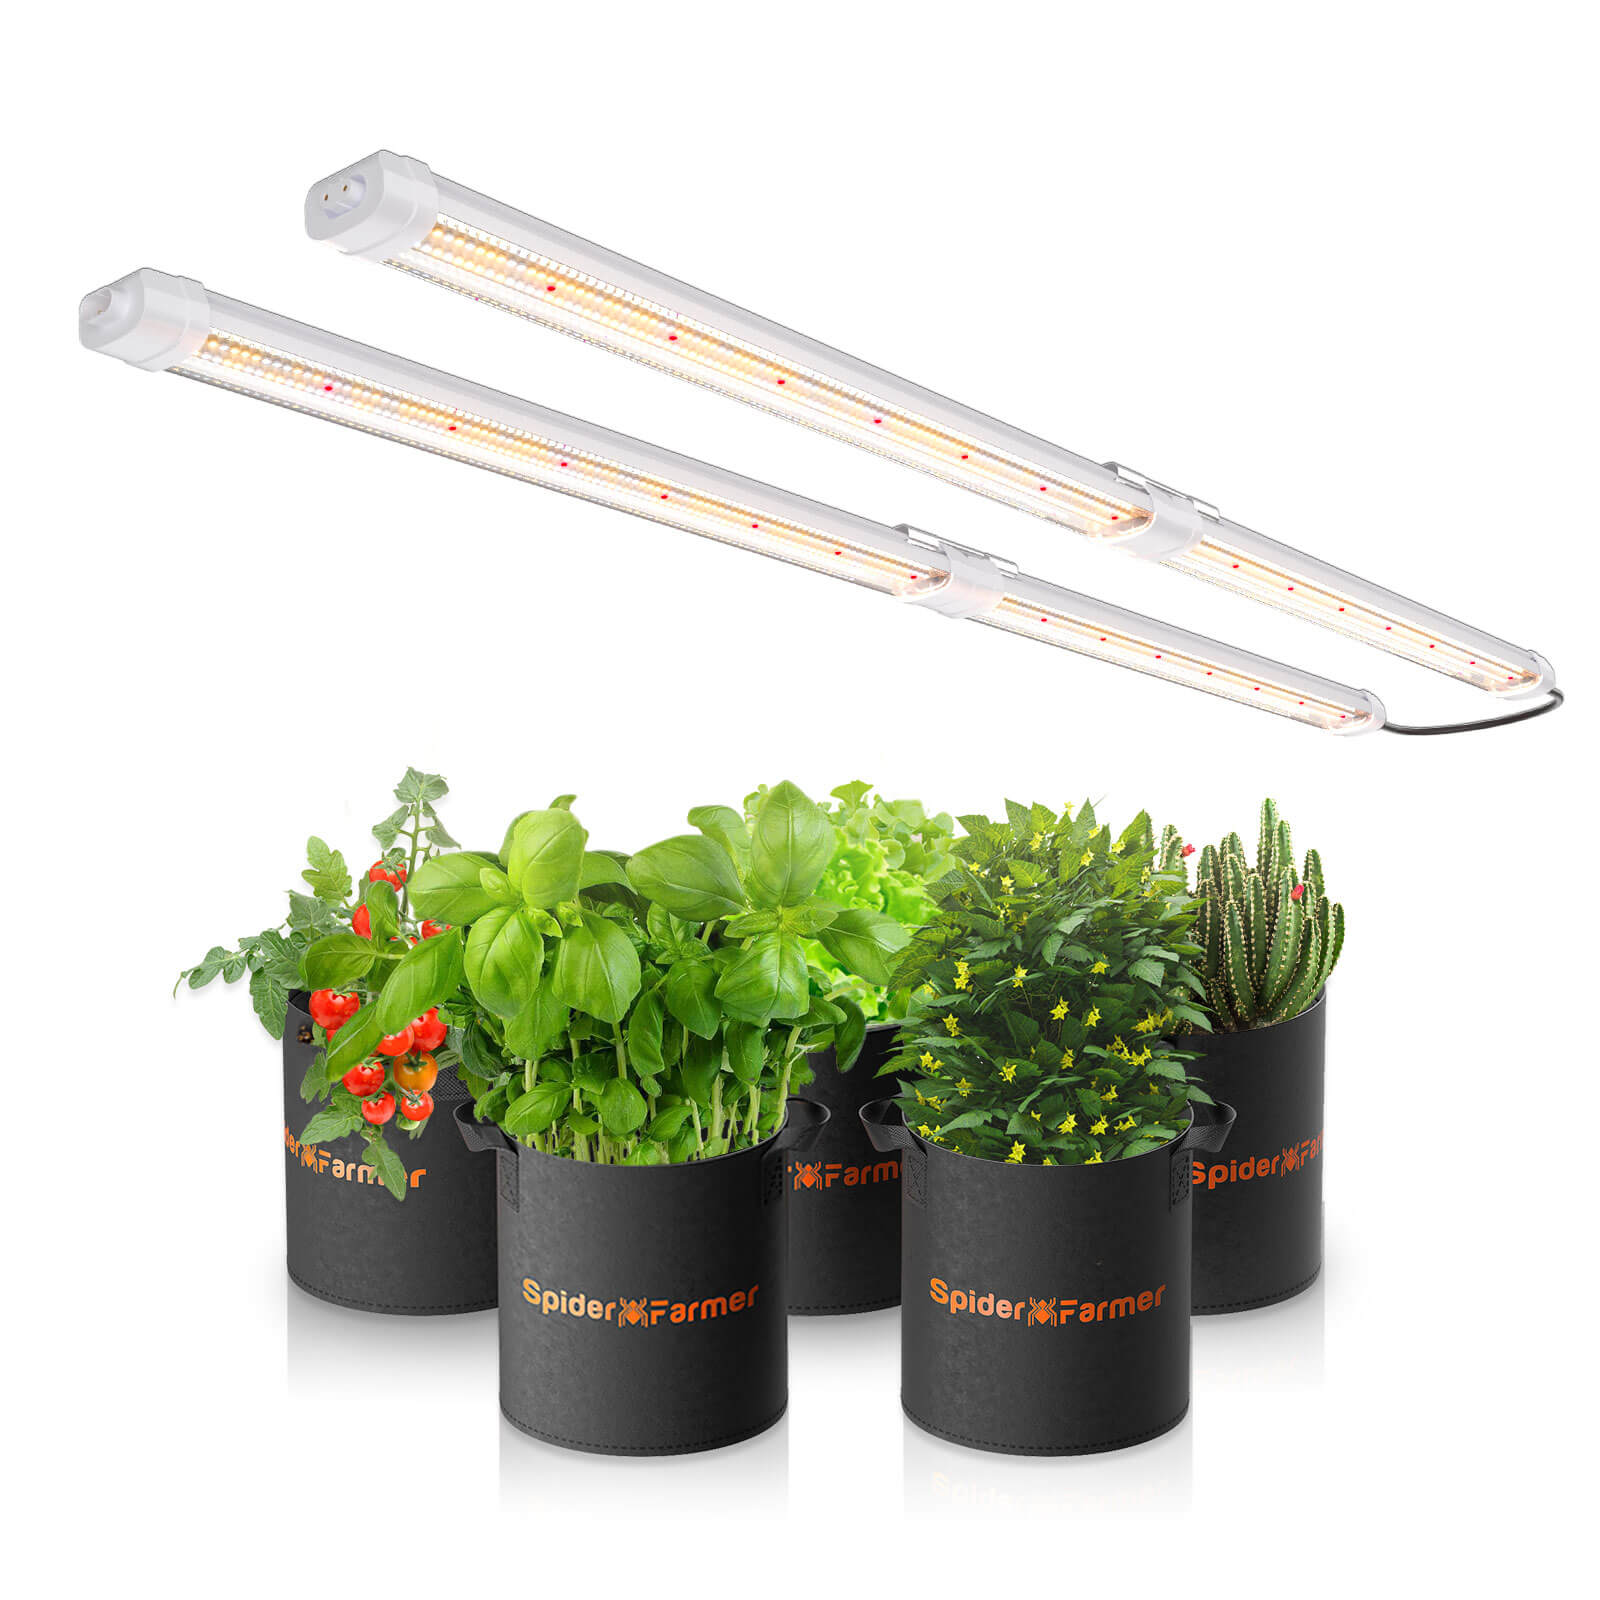 LED Grow Light Strip Kit with Full Spectrum LEDs, 36W IP65 Waterproof  Dimmable LED Plant Grow Light Bar for Germination, Growth and Flowering